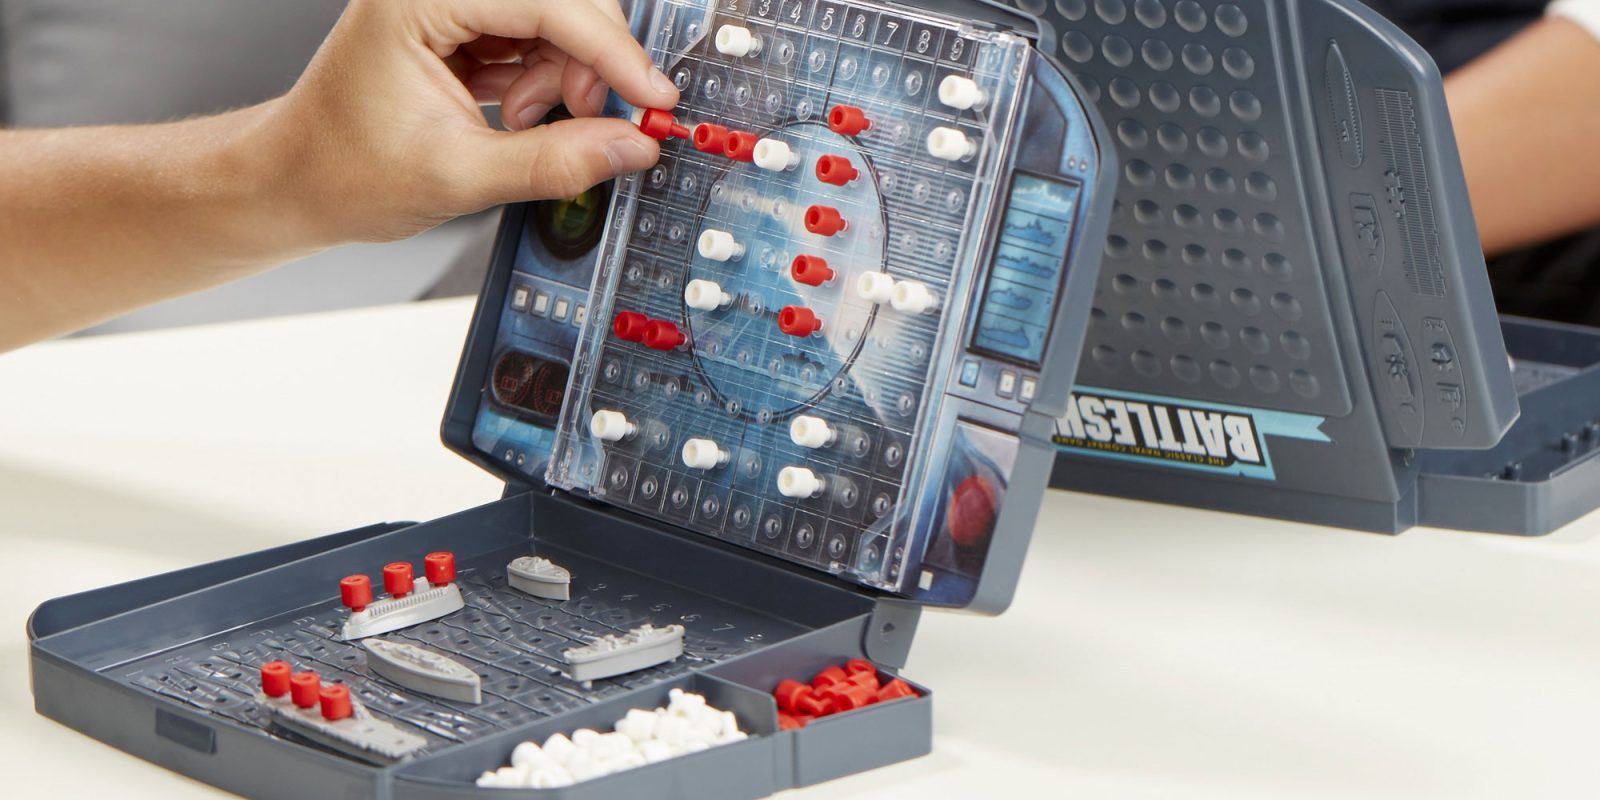 battleship-is-a-must-have-two-player-game-for-under-12-at-walmart